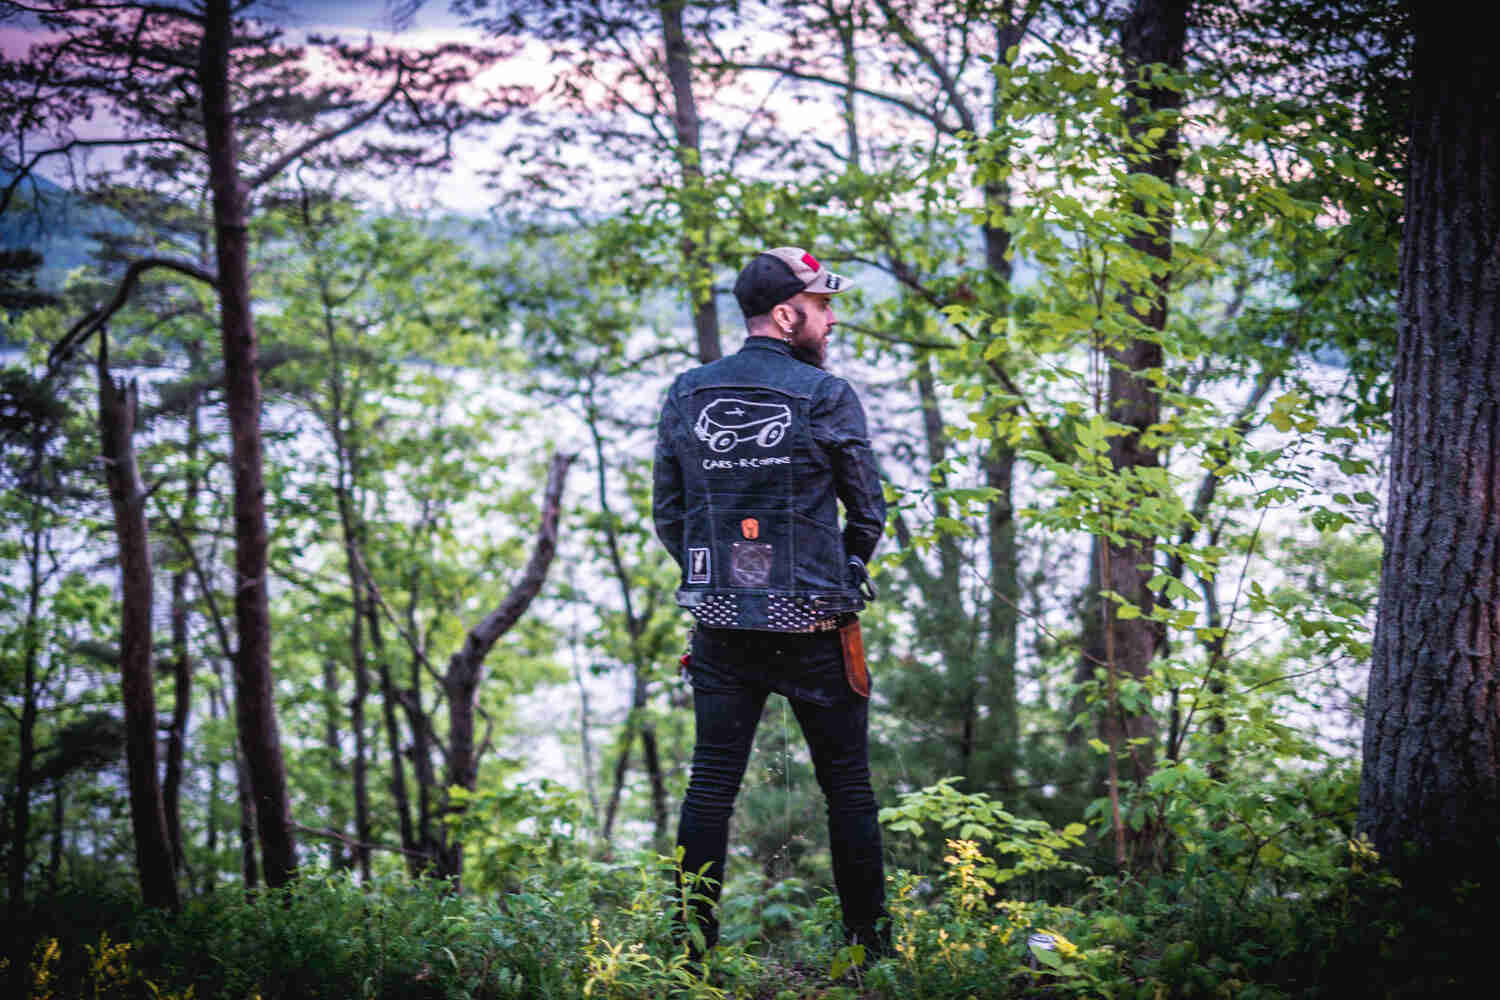 Rear view of a person standing while facing trees, wearing a jean jacket with, Cars-R-Coffins, spelled on the back